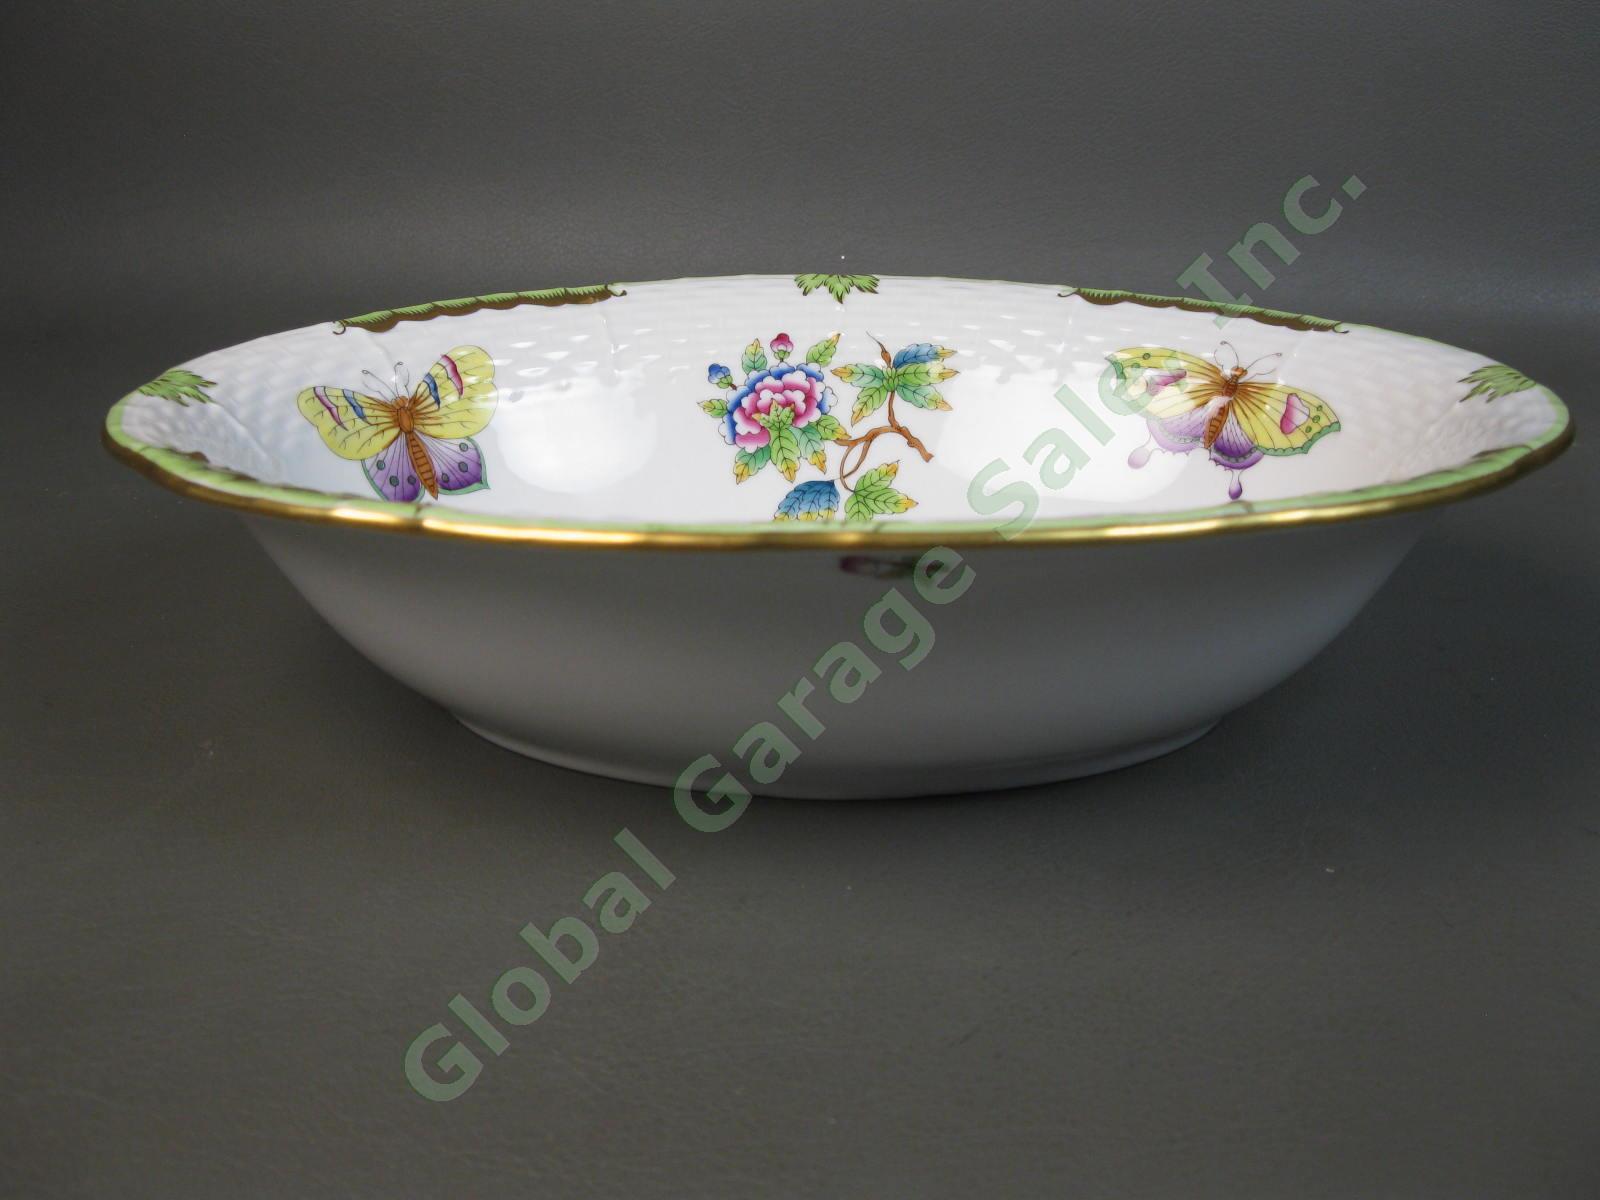 Herend Queen Victoria 10" Inch Oval Vegetable Serving Bowl 381/VBO Green Gold NR 1